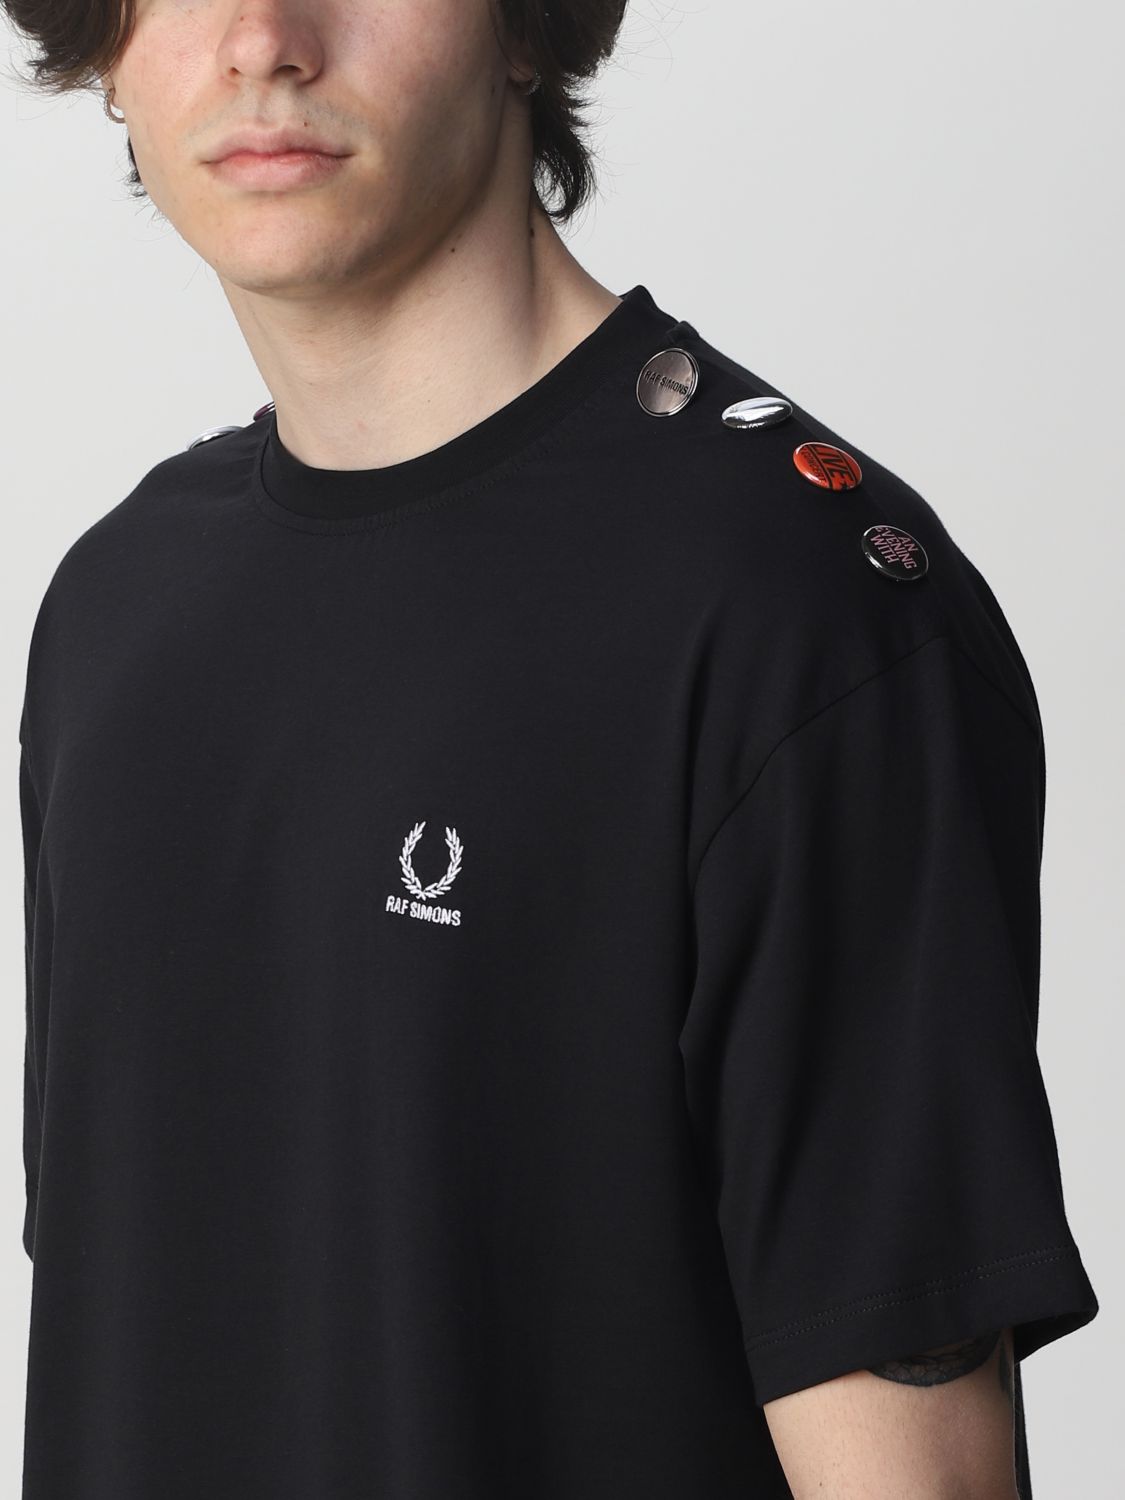 Tシャツ Fred Perry By Raf Simons: Tシャツ メンズ Fred Perry By Raf Simons ブラック 3